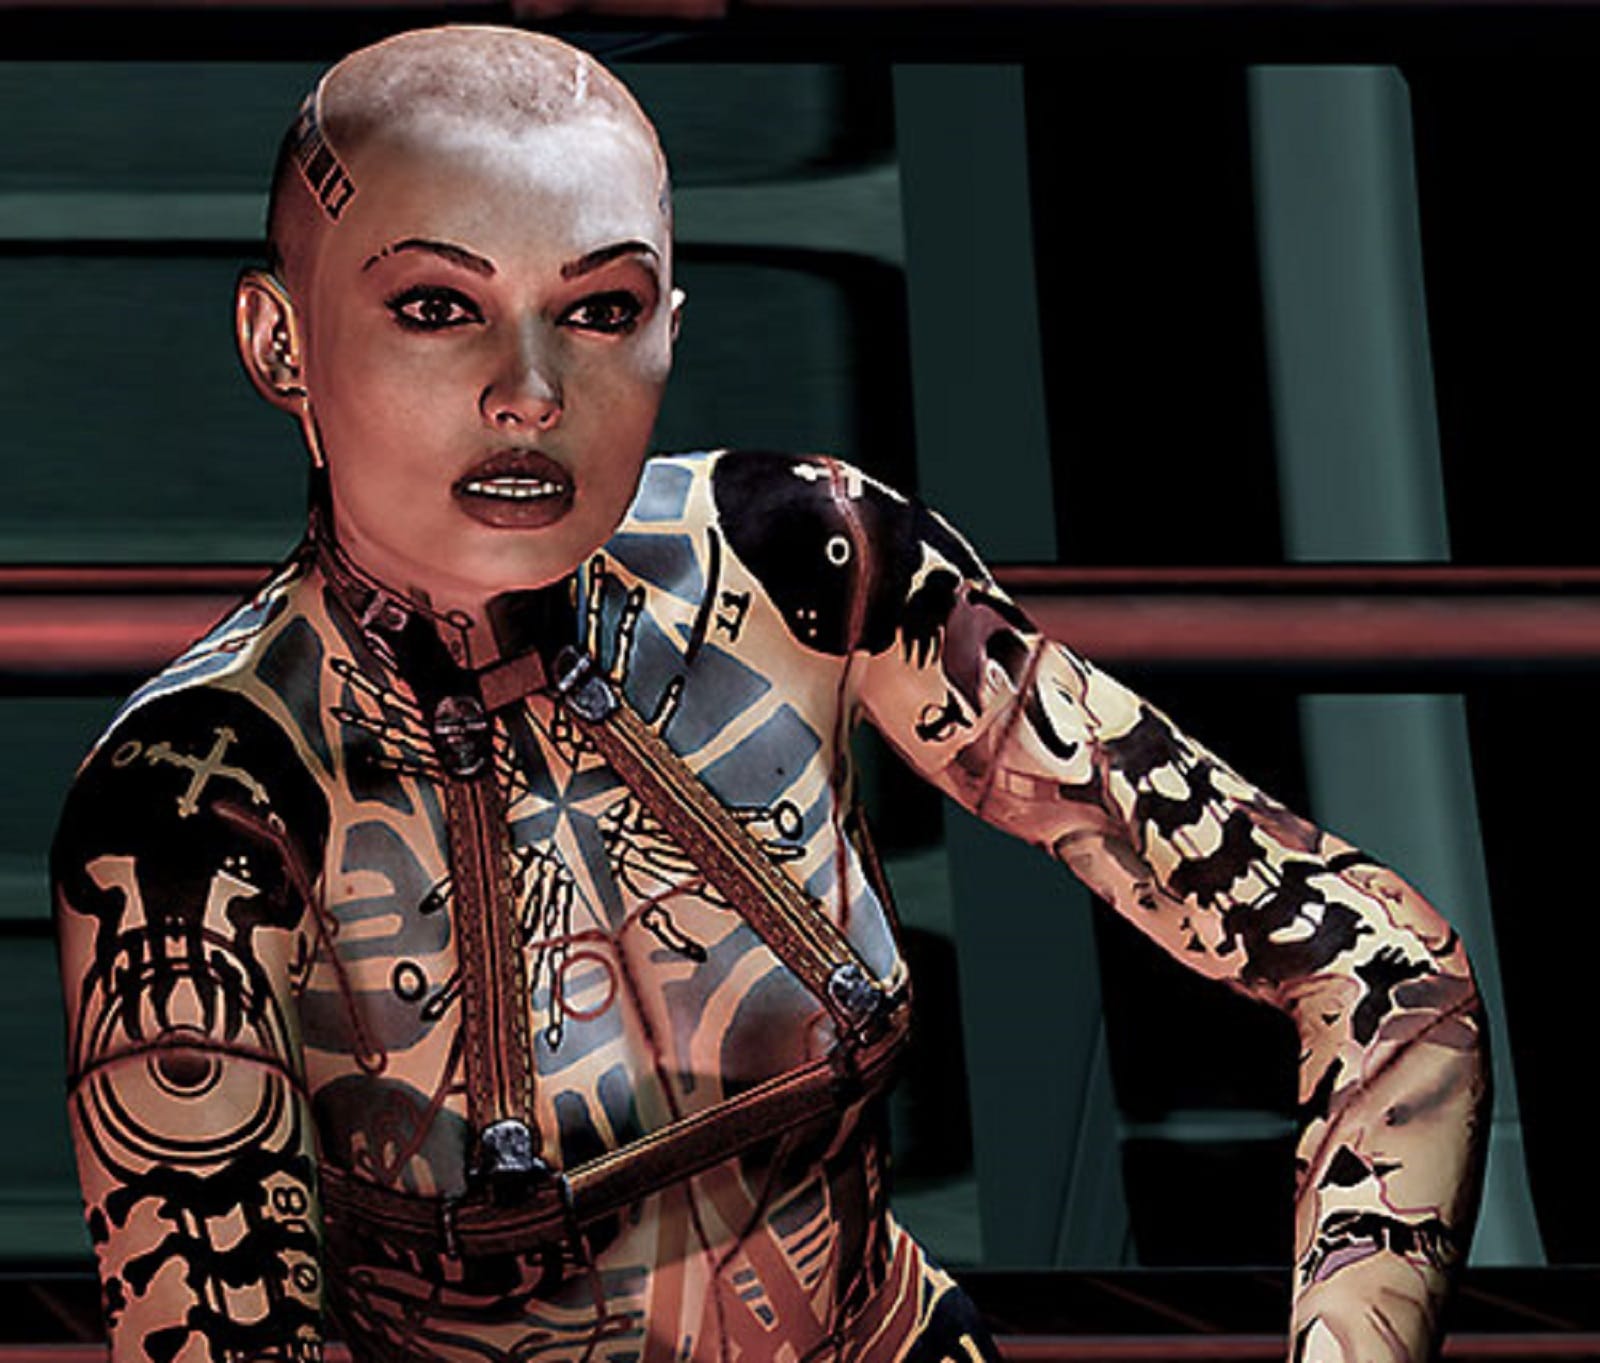 Mass Effect: A character introduced in 2010's Mass Effect 2, the female biotic Jack, was intended to be pansexual